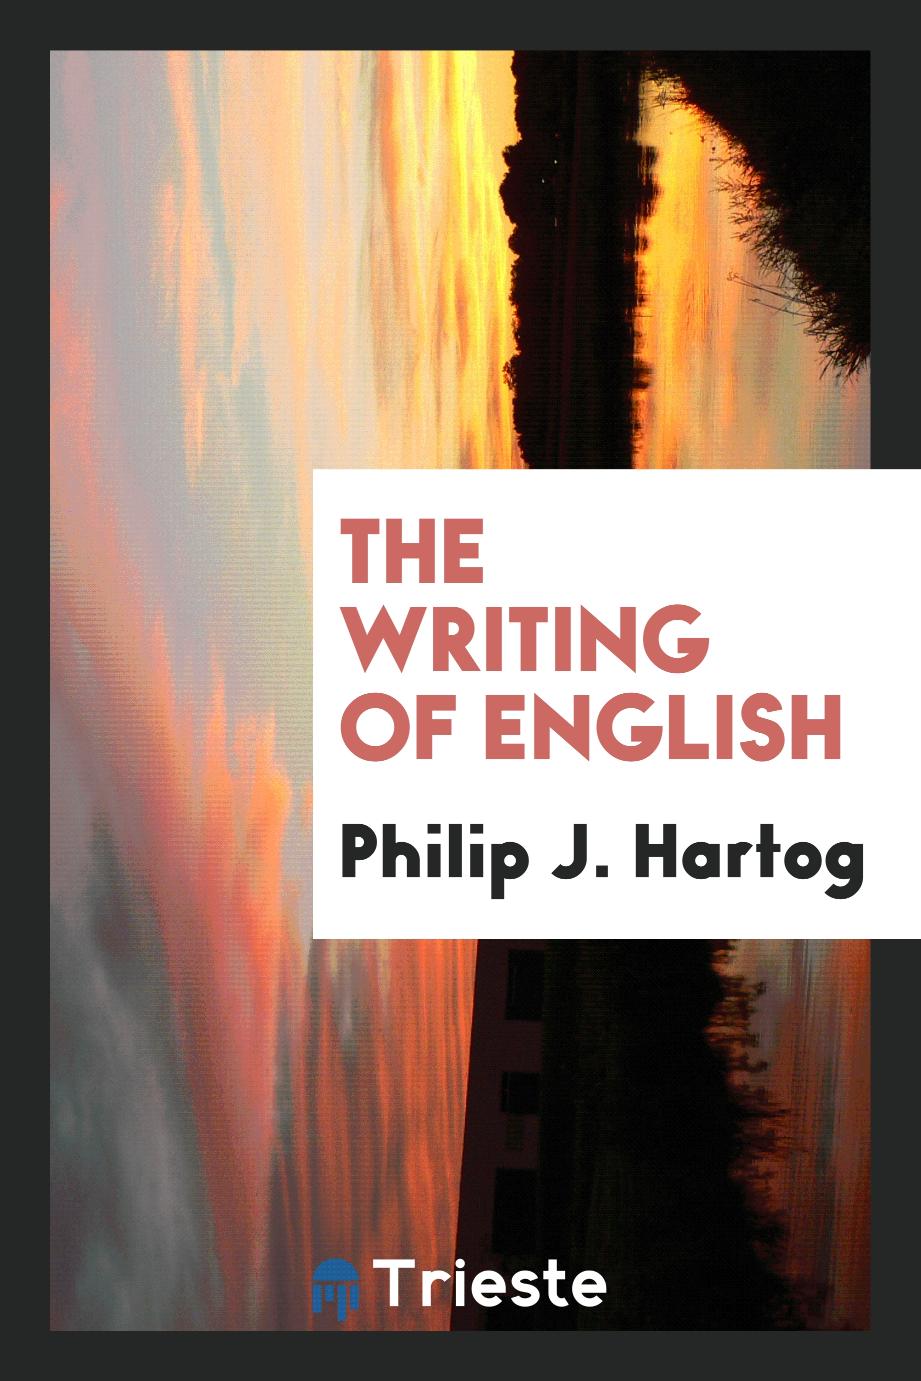 The writing of English